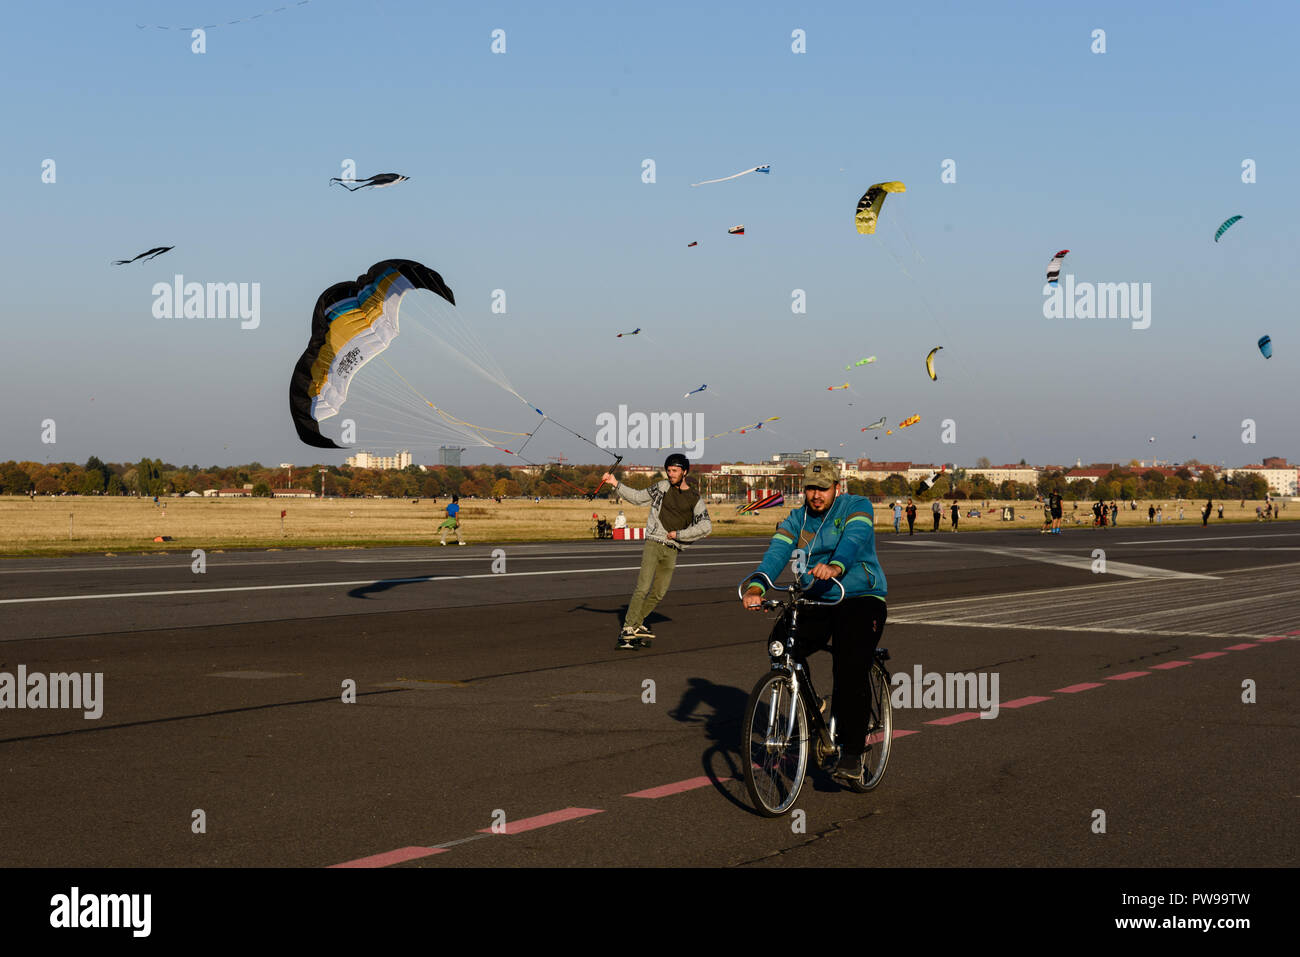 Berlin, Germany. 14th Oct, 2018. A man is seen riding a bicycle next to a man flying a kite at the Tempelhof field. The good weather in October brings many visitors to the park at the former Tempelhof Airport. Credit: Markus Heine/SOPA Images/ZUMA Wire/Alamy Live News Stock Photo